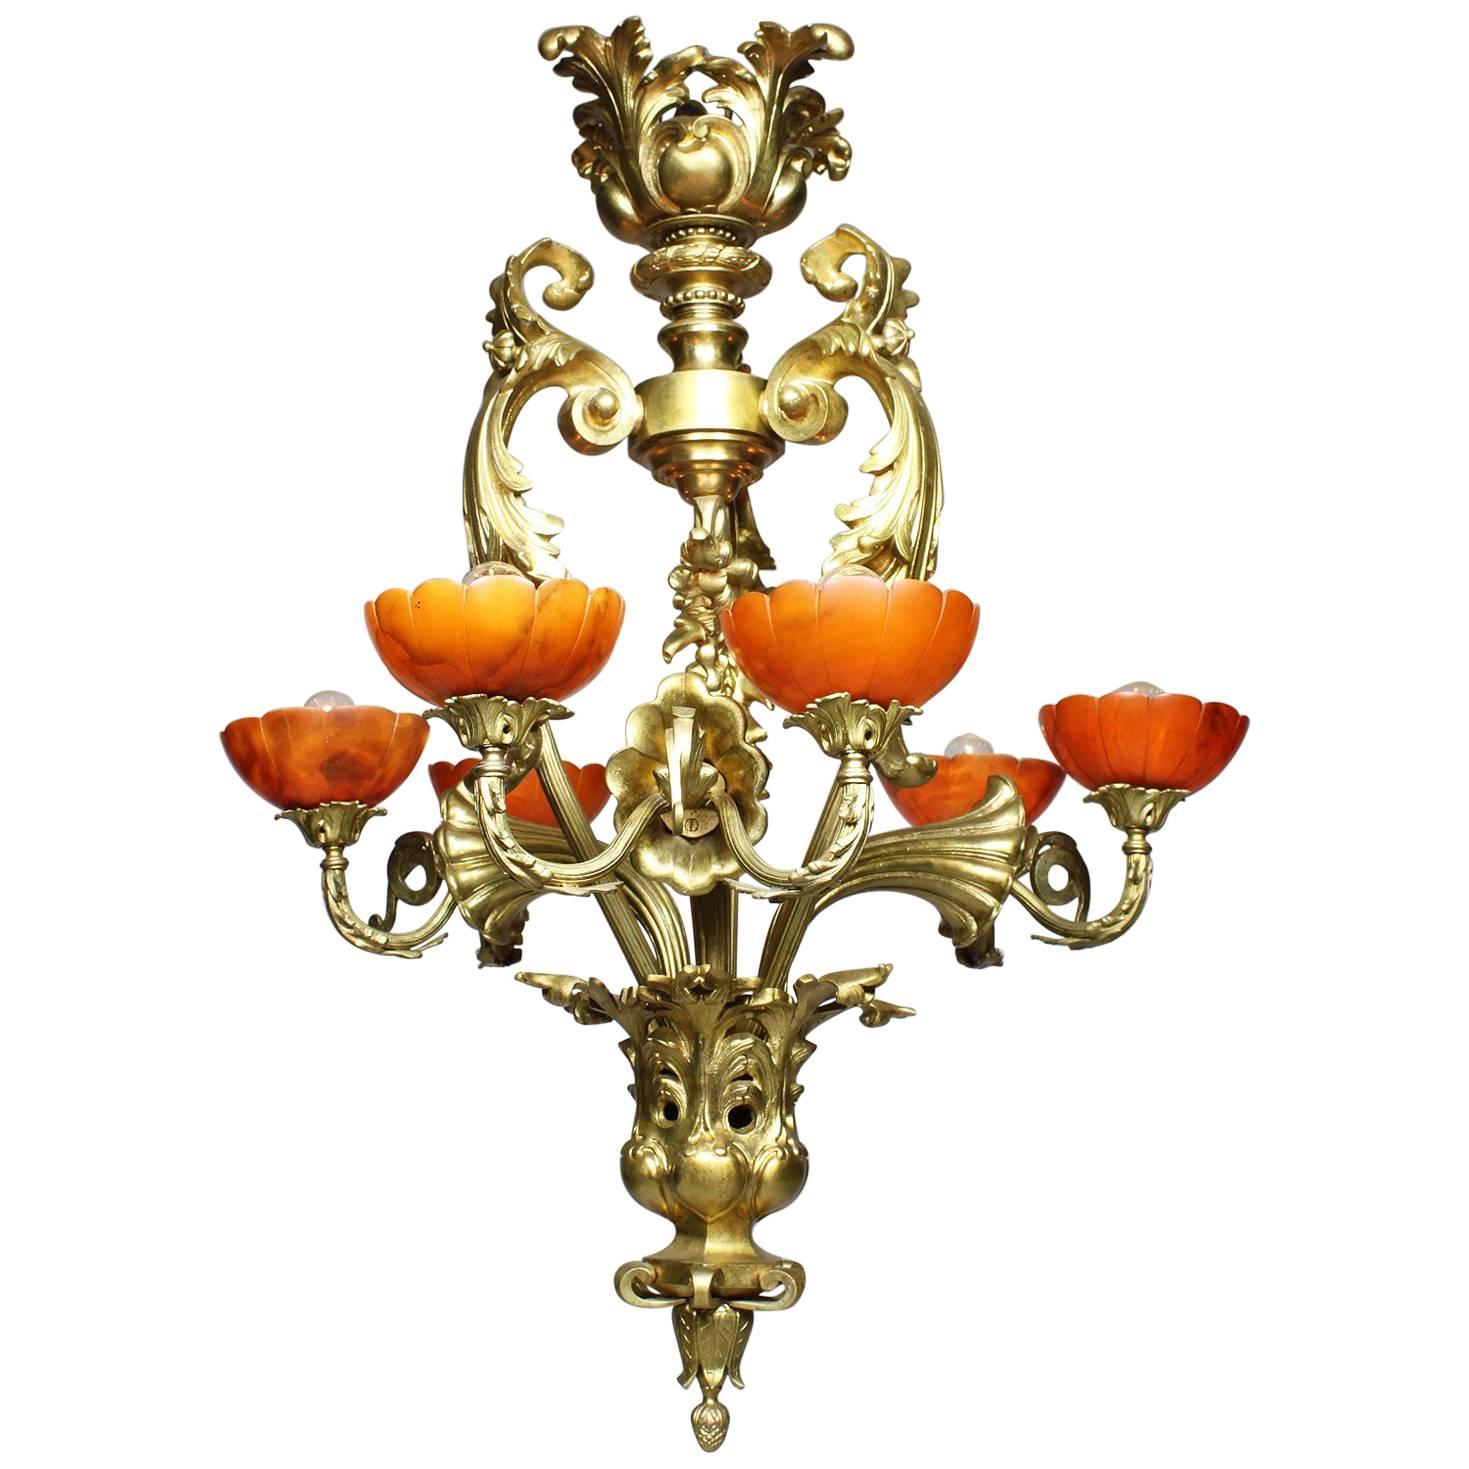 French Belle Époque Early 20th Century Gilt-Bronze & Alabaster Lilies Chandelier For Sale